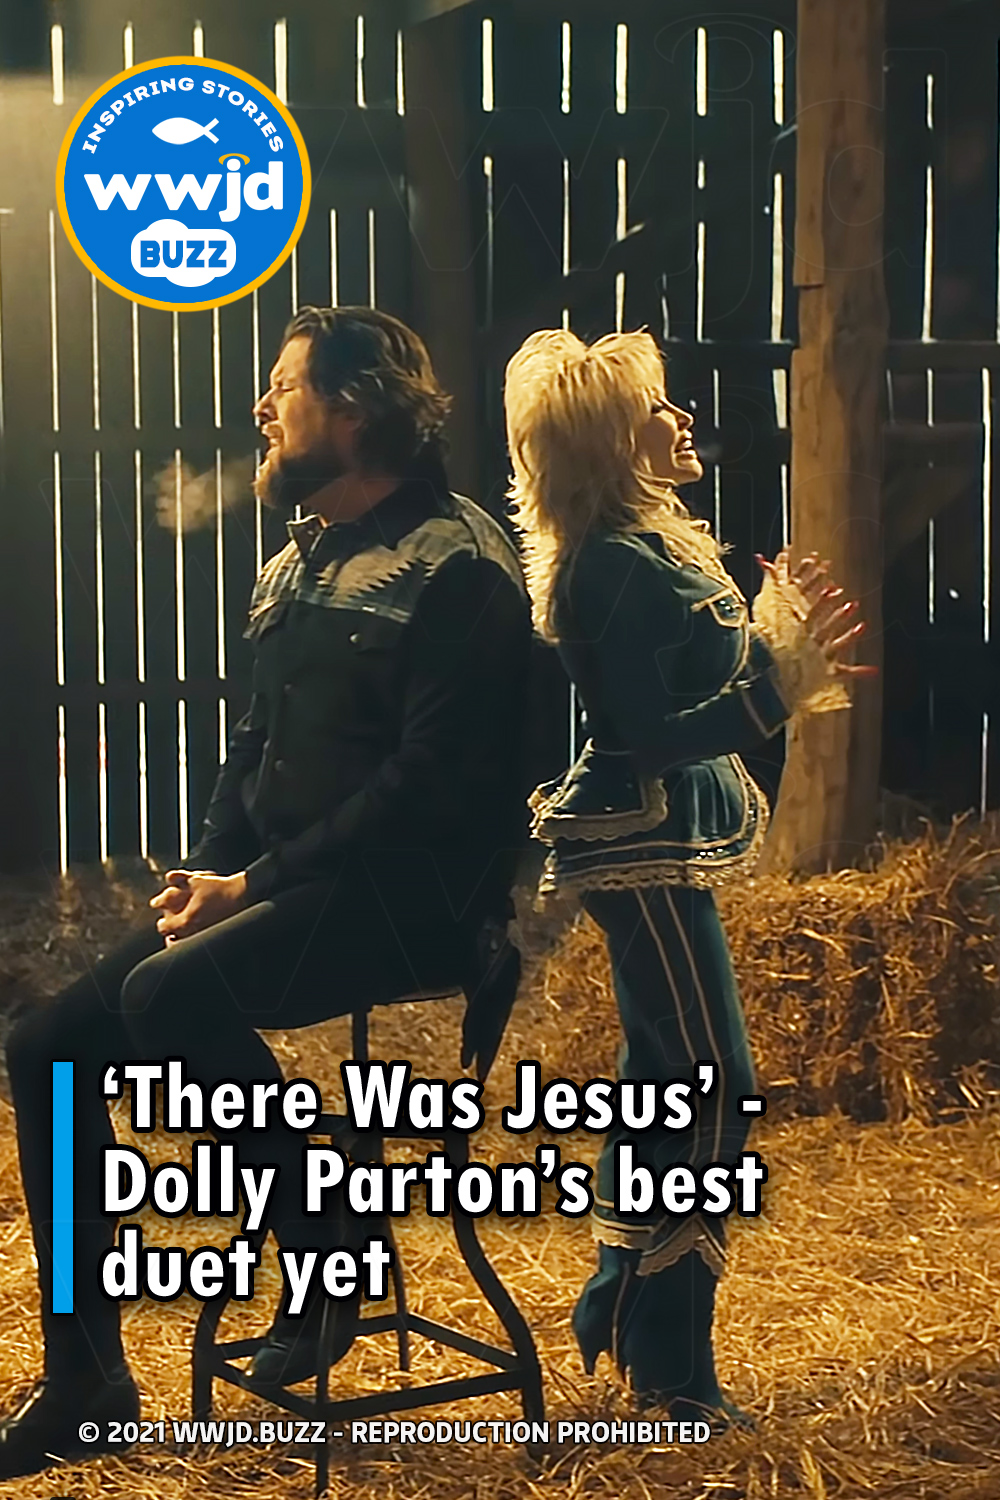 ‘There Was Jesus’ - Dolly Parton’s best duet yet